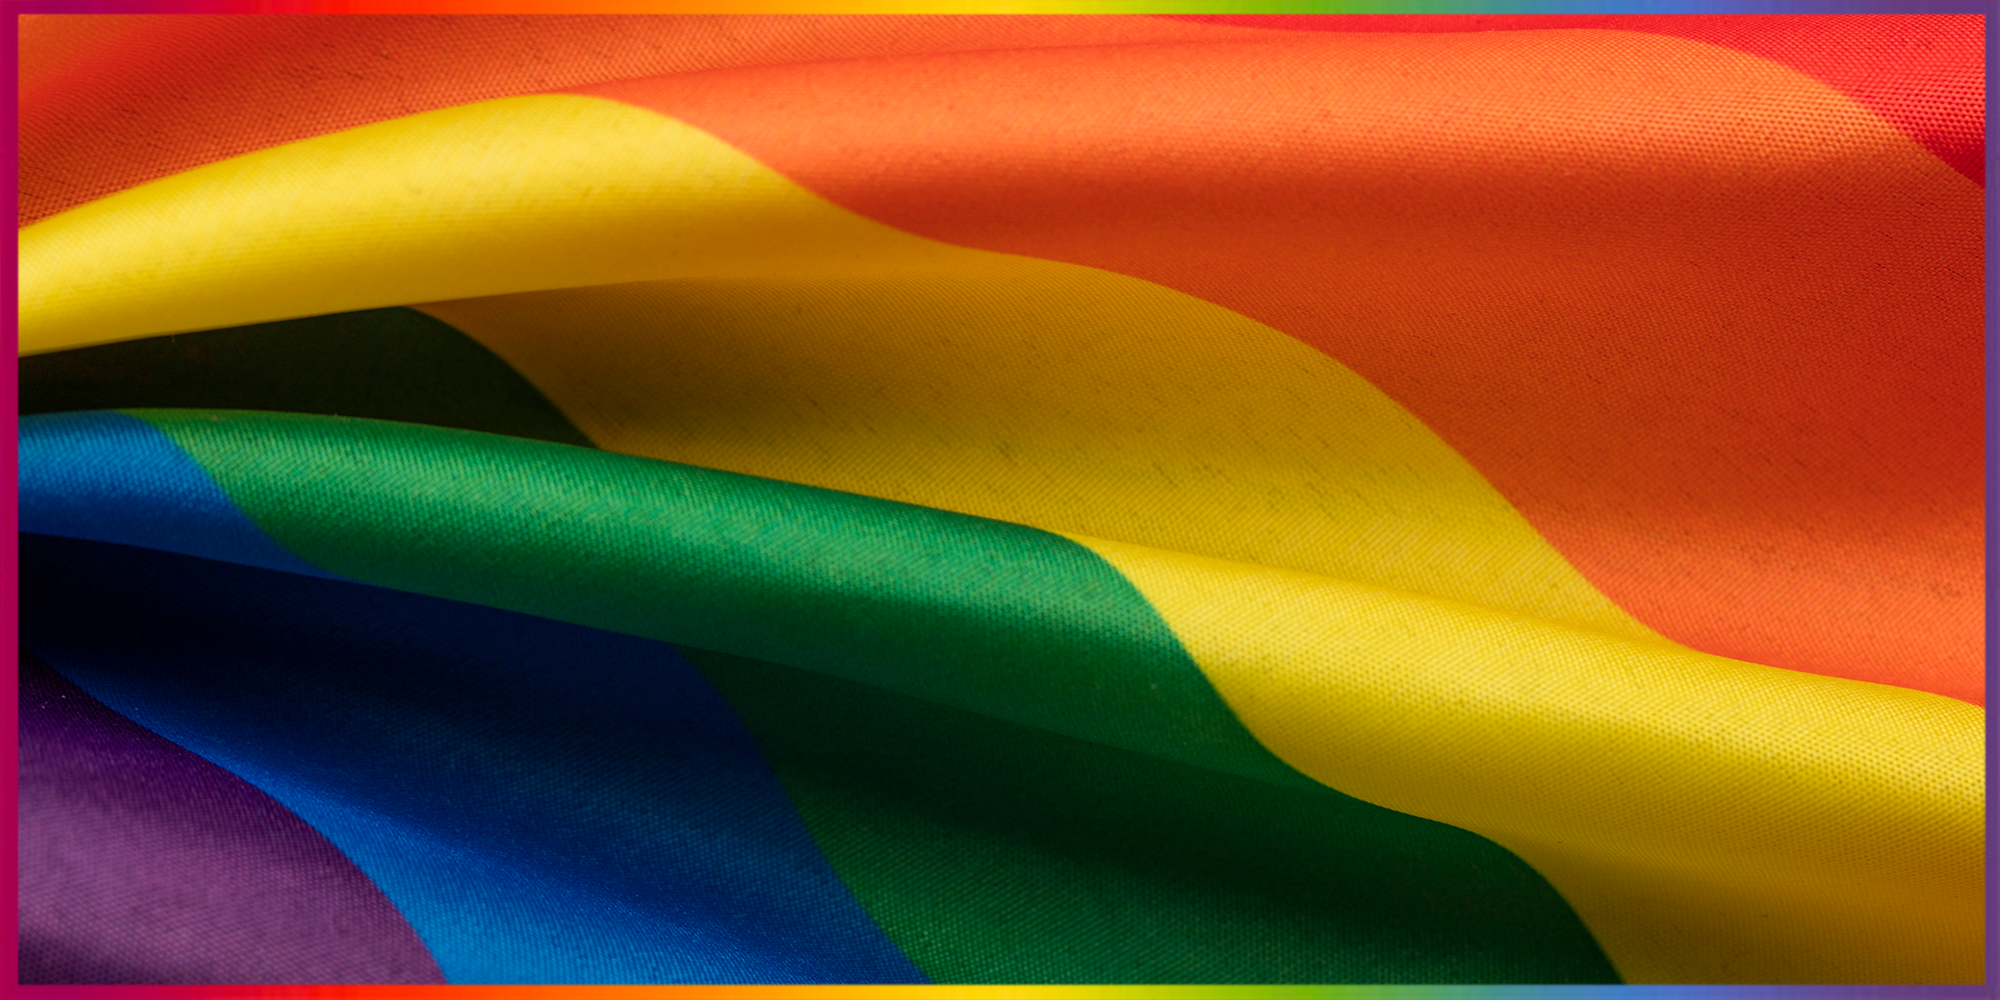 What is the Pride Flag?  Pride Rainbow Flag Meaning & Facts